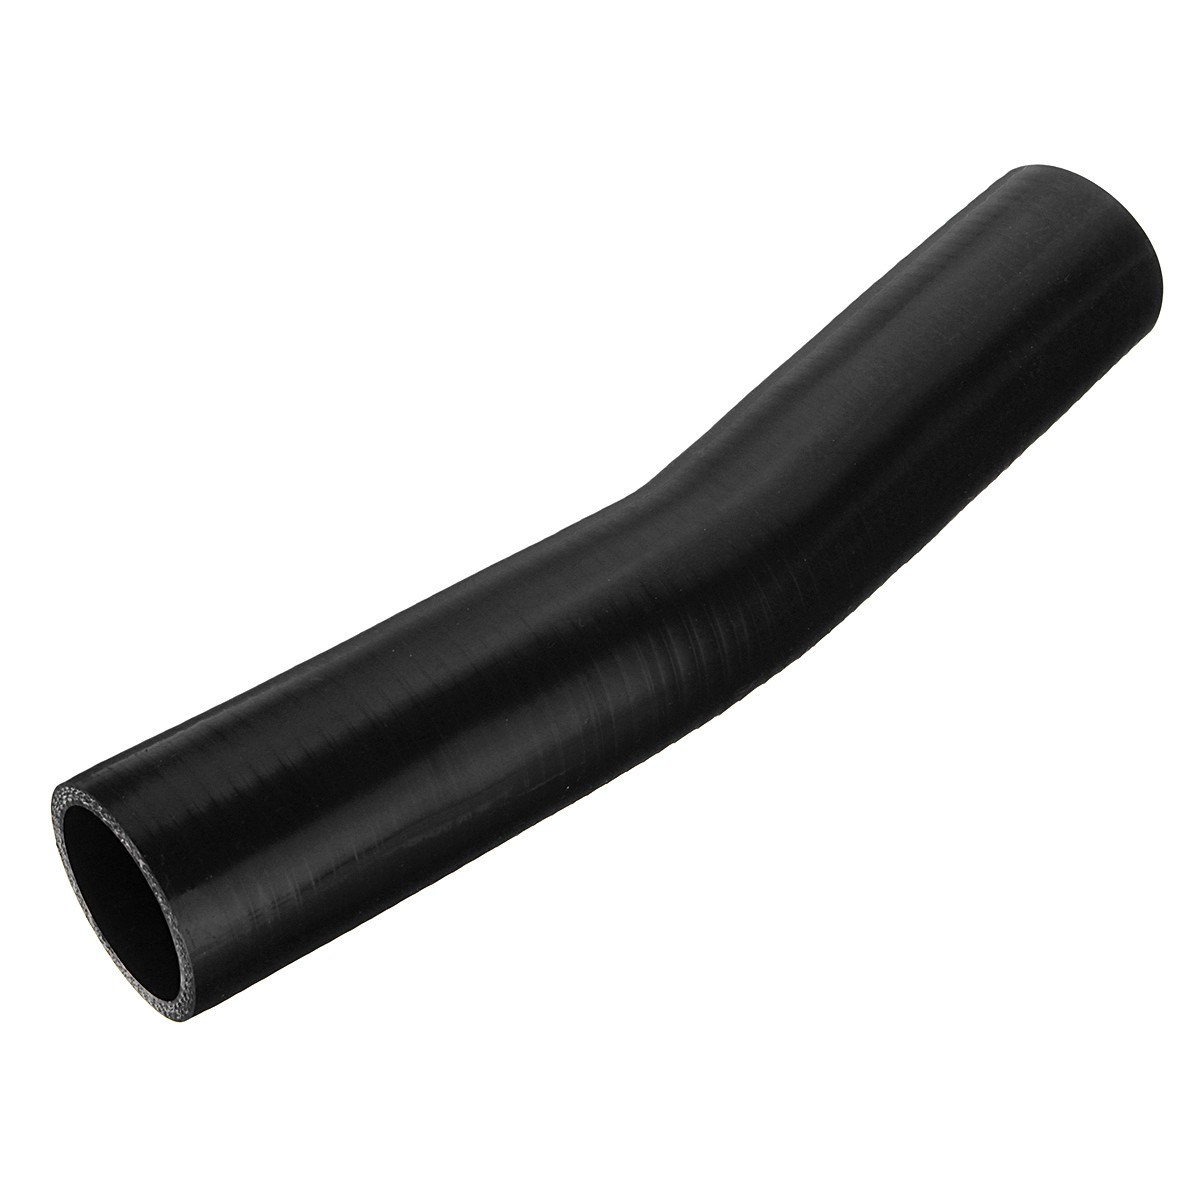 150mm-Black-Silicone-Hose-Rubber-15-Degree-Elbow-Bend-Hose-Air-Water-Coolant-Joiner-Pipe-Tube-1591449-2